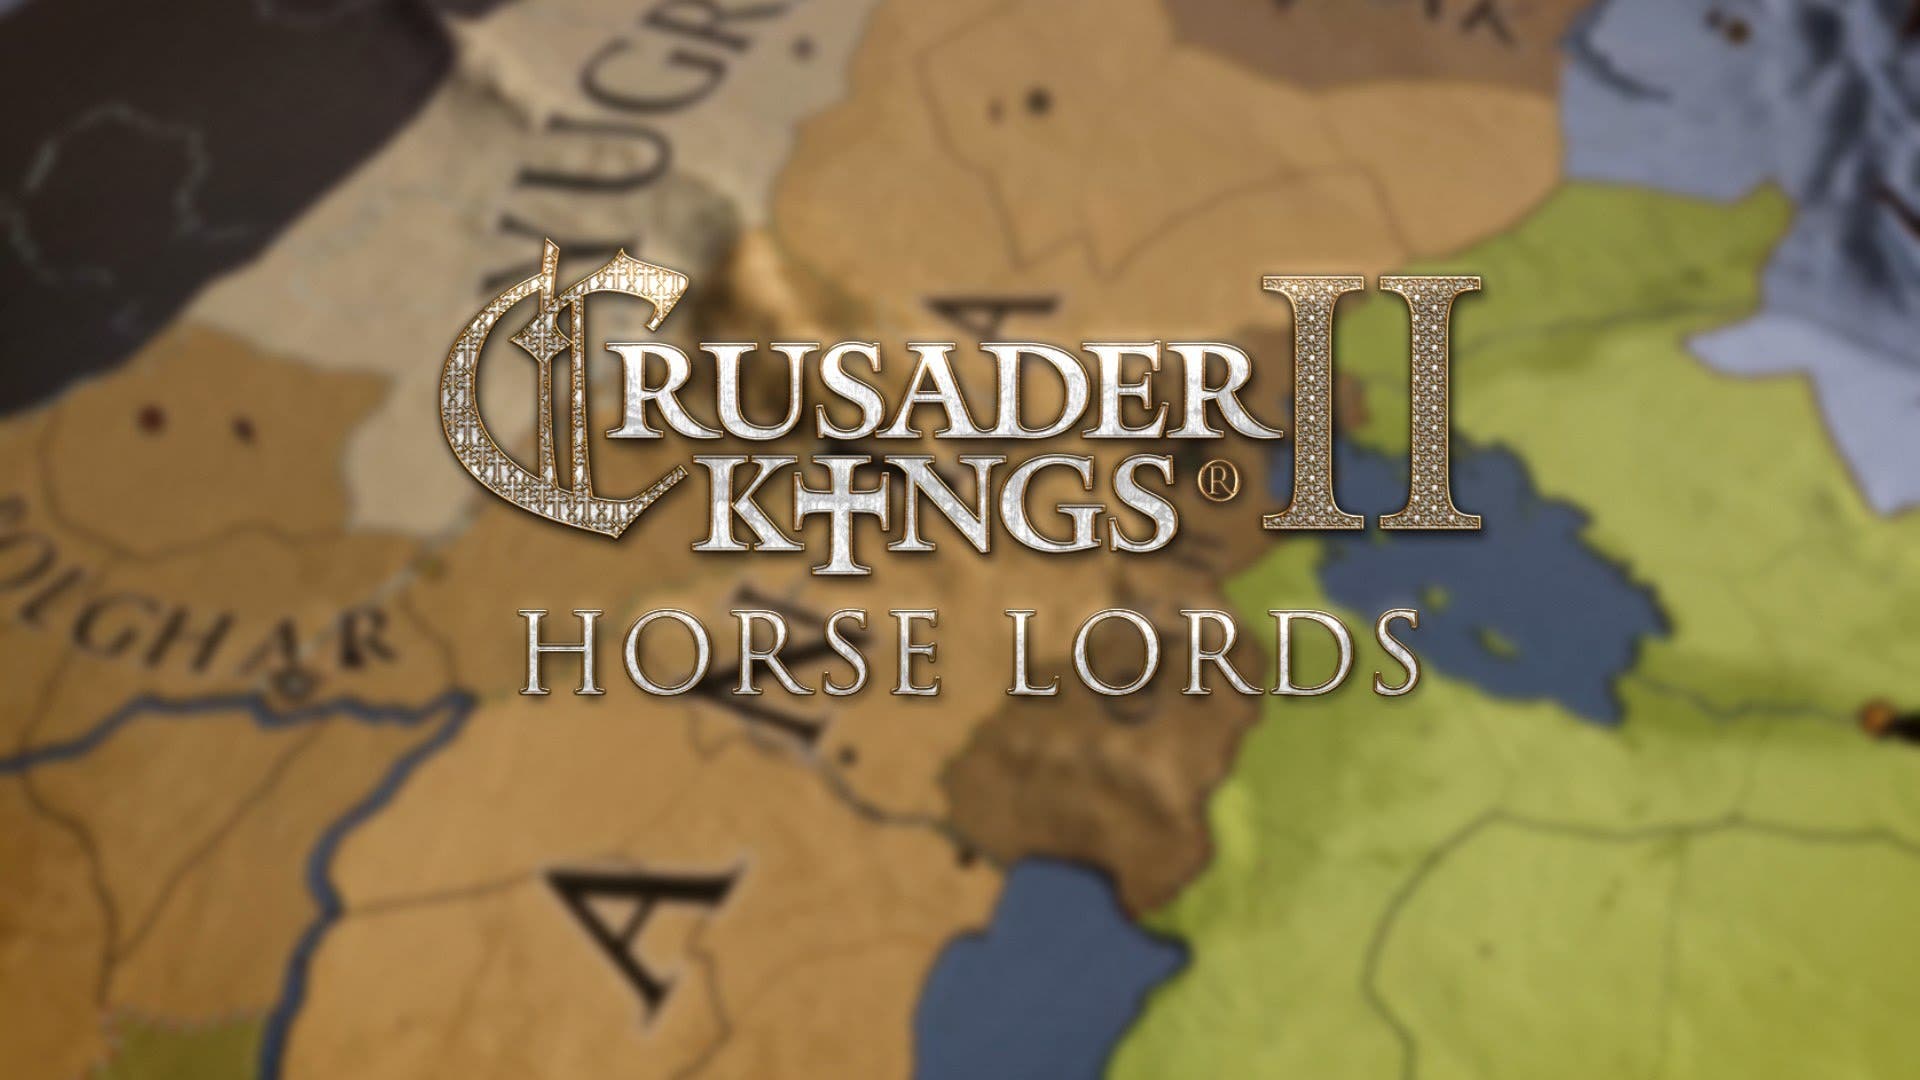 the horse lords have been unleas